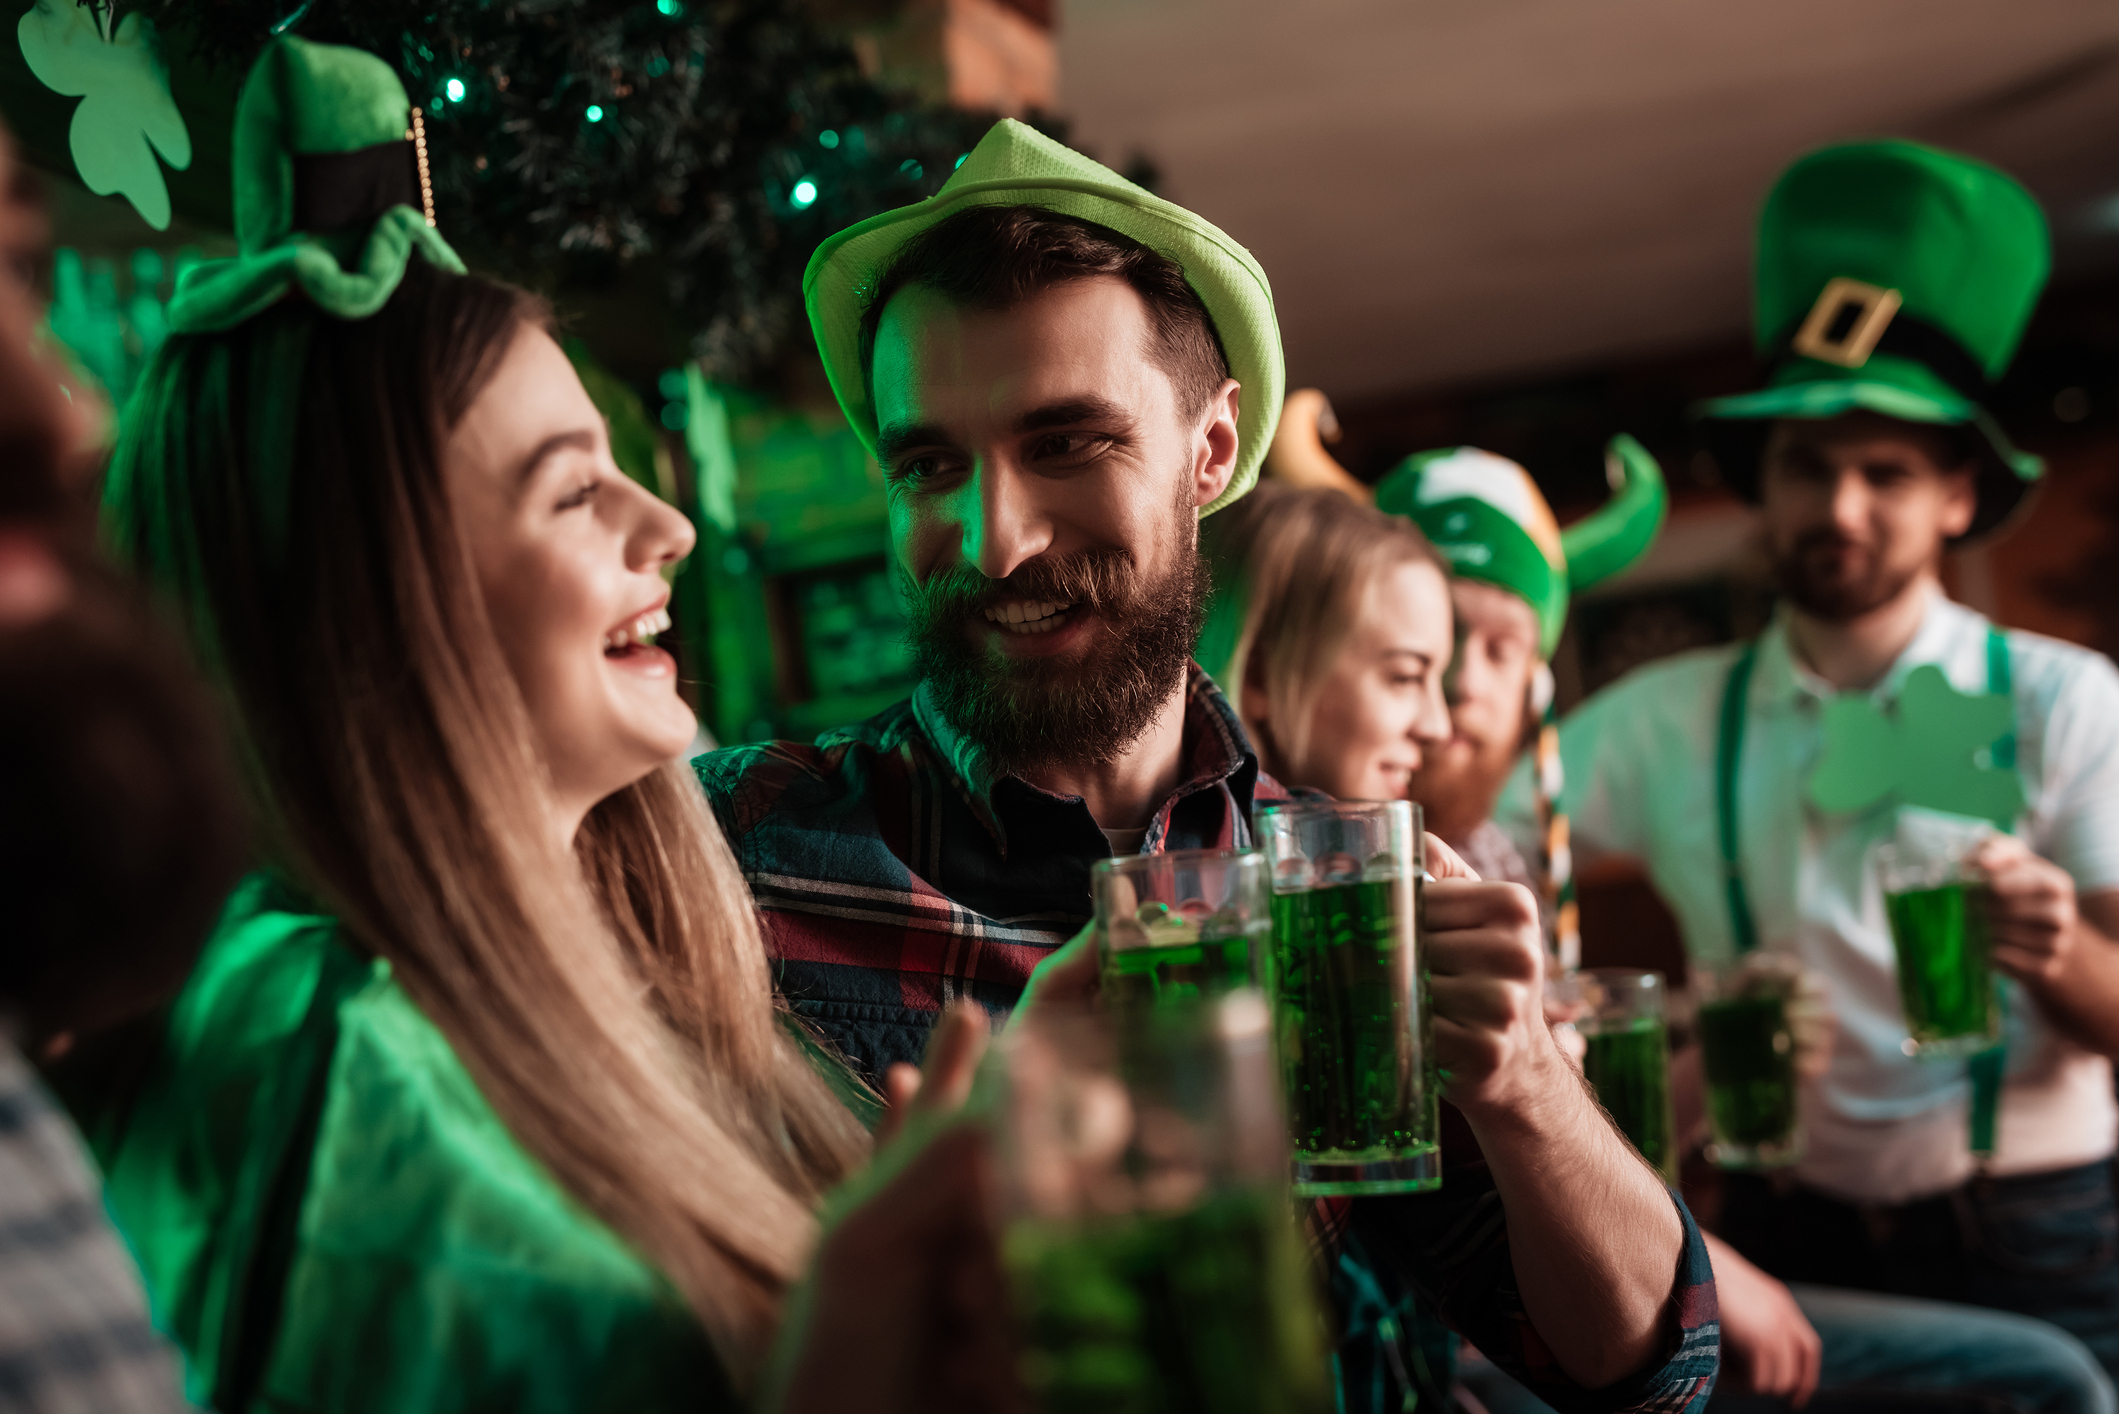 Here are a few places where you can celebrate St. Patrick's Day in